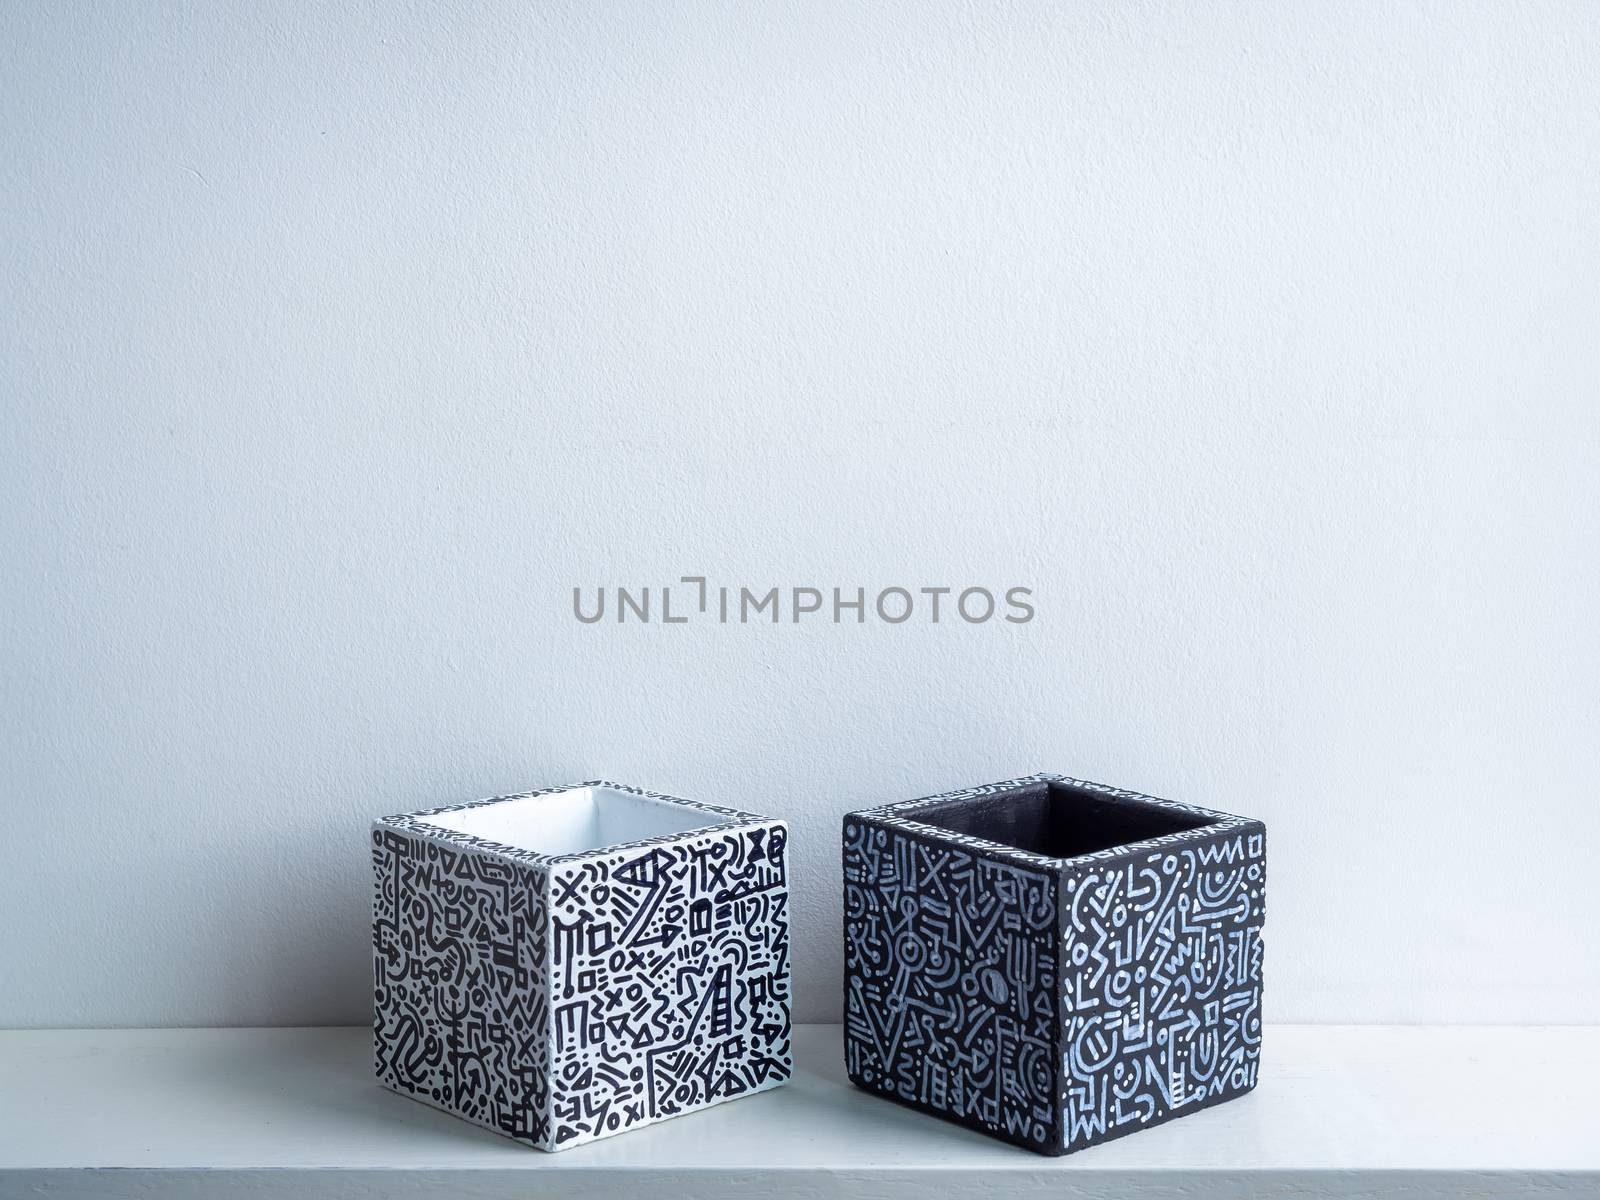 Cactus pot. Concrete pot. Empty black and white with modern graphic pattern geometric concrete planters on white wooden shelf isolated on white wall background.